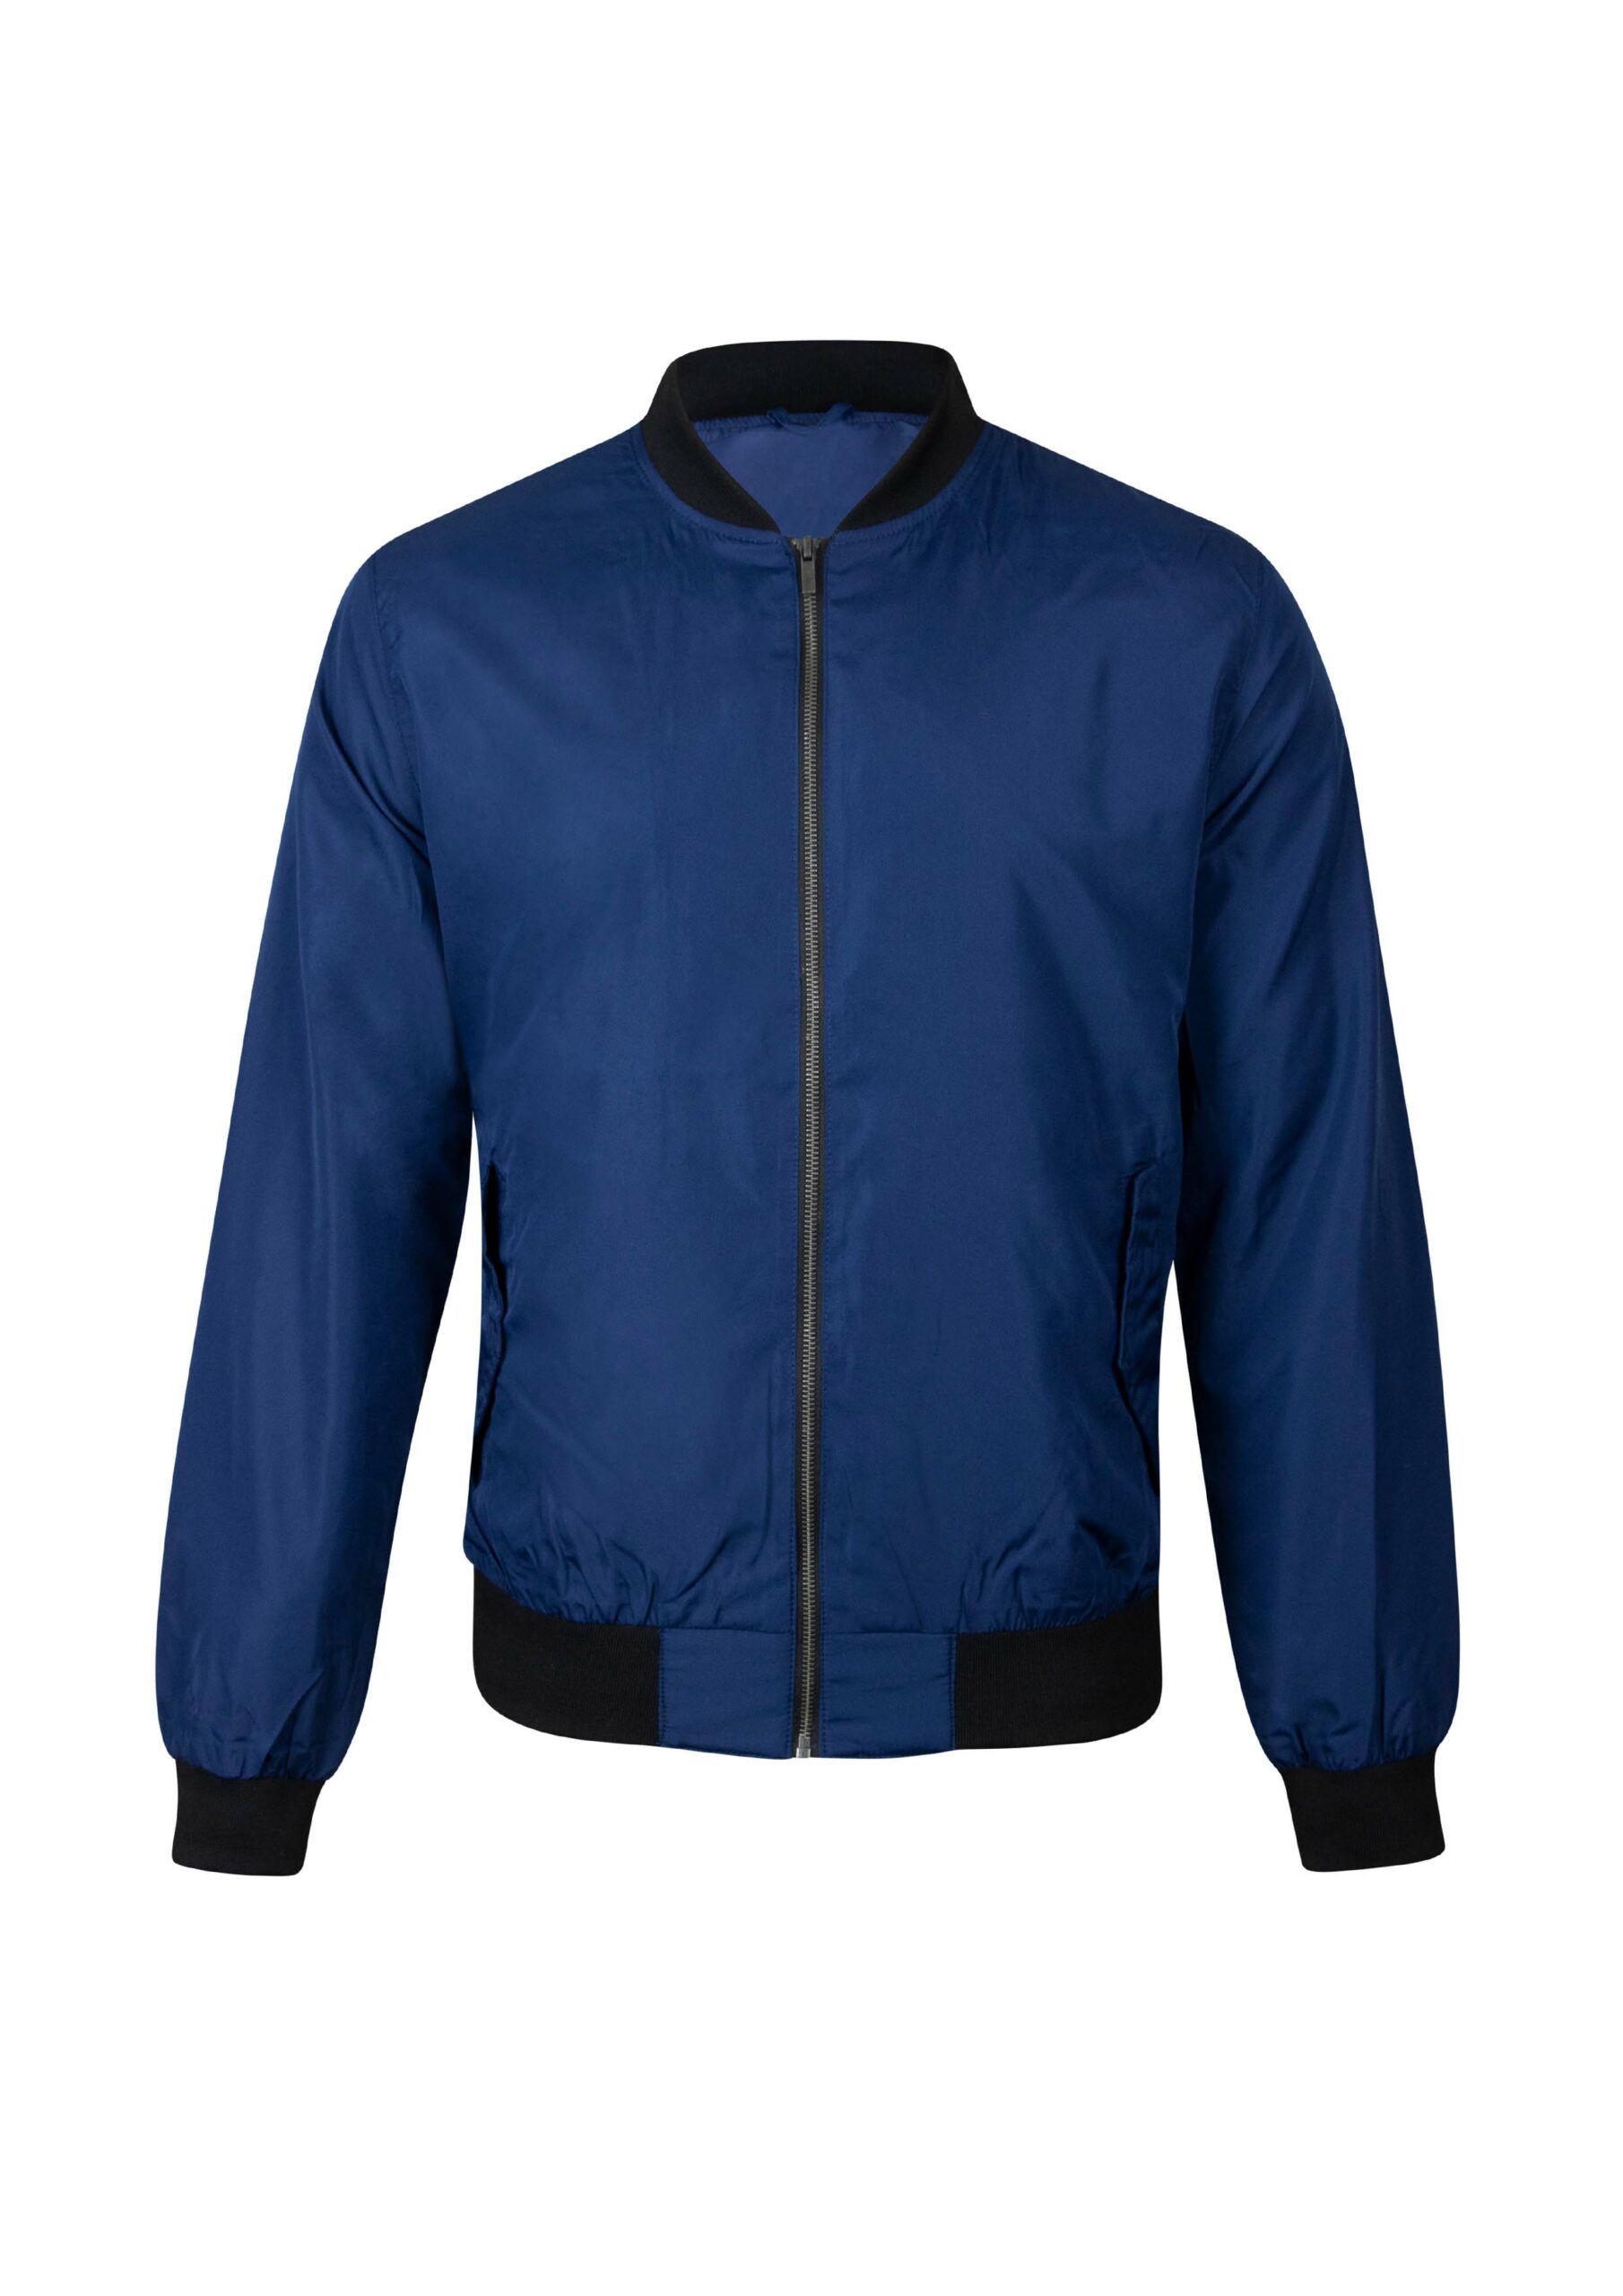 Mens Jacket - Artisan Outfitters Ltd